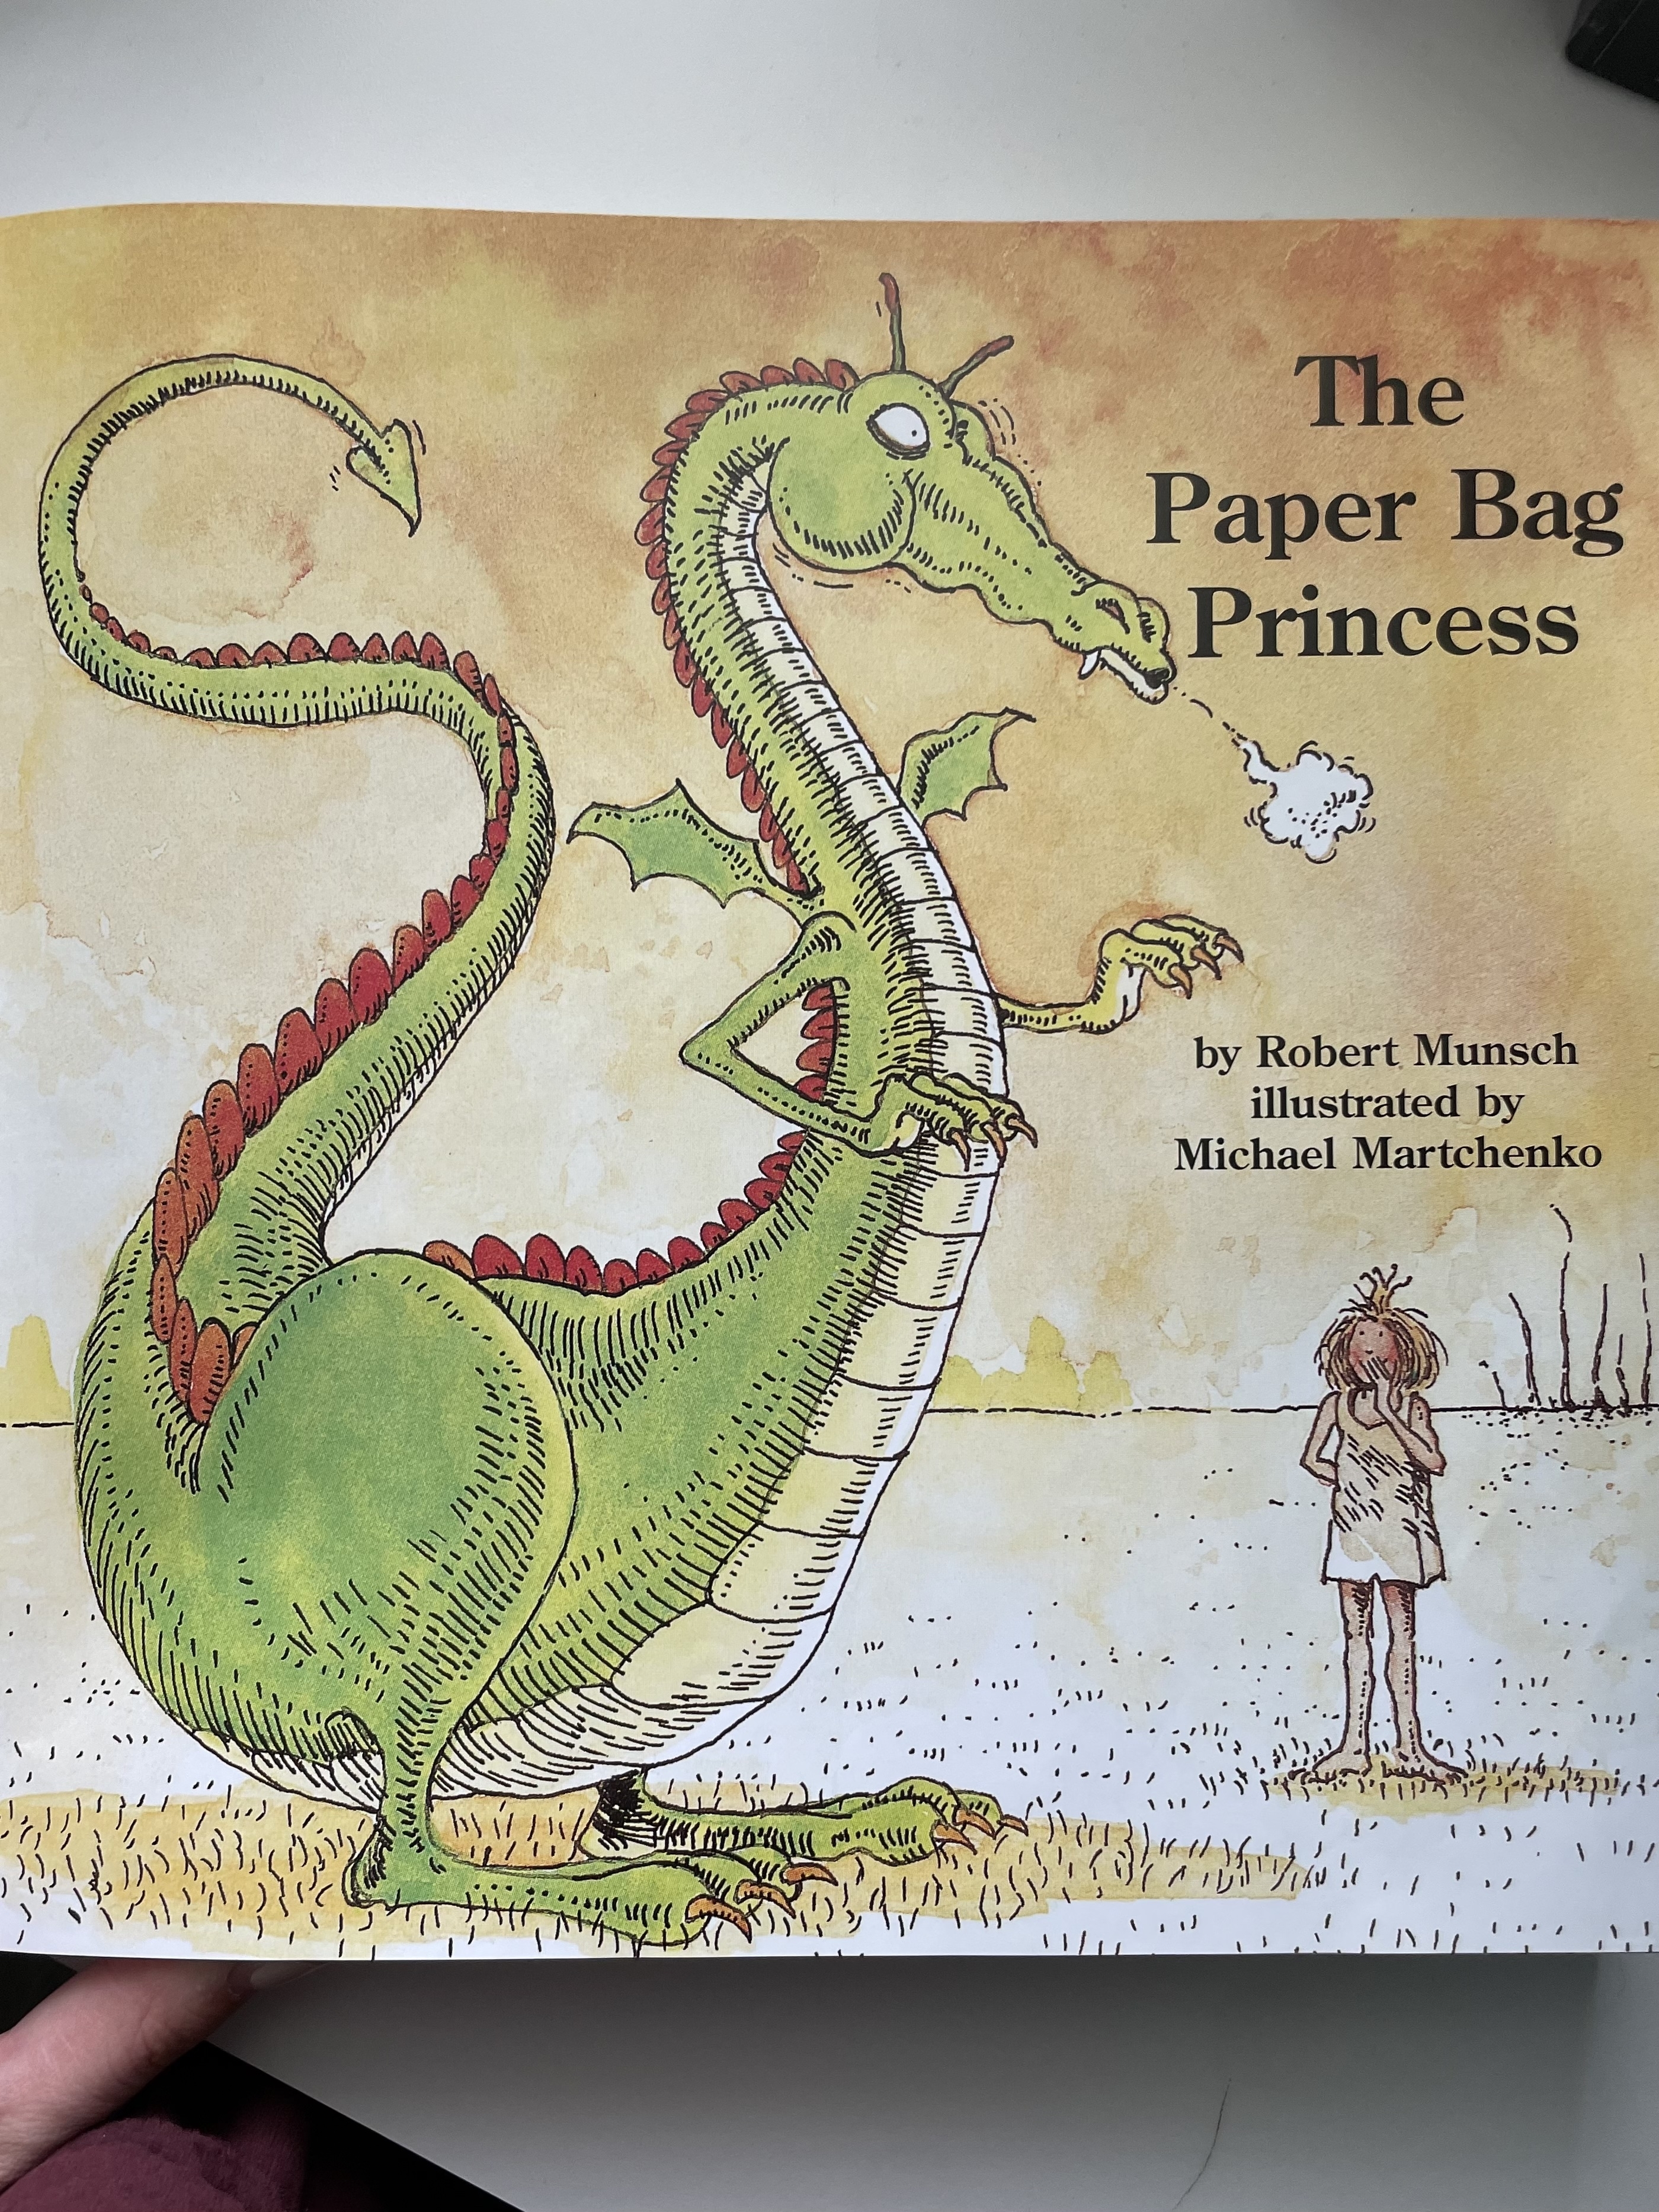 Illustration of a green dragon and a small girl from the book &quot;The Paper Bag Princess&quot; by Robert Munsch